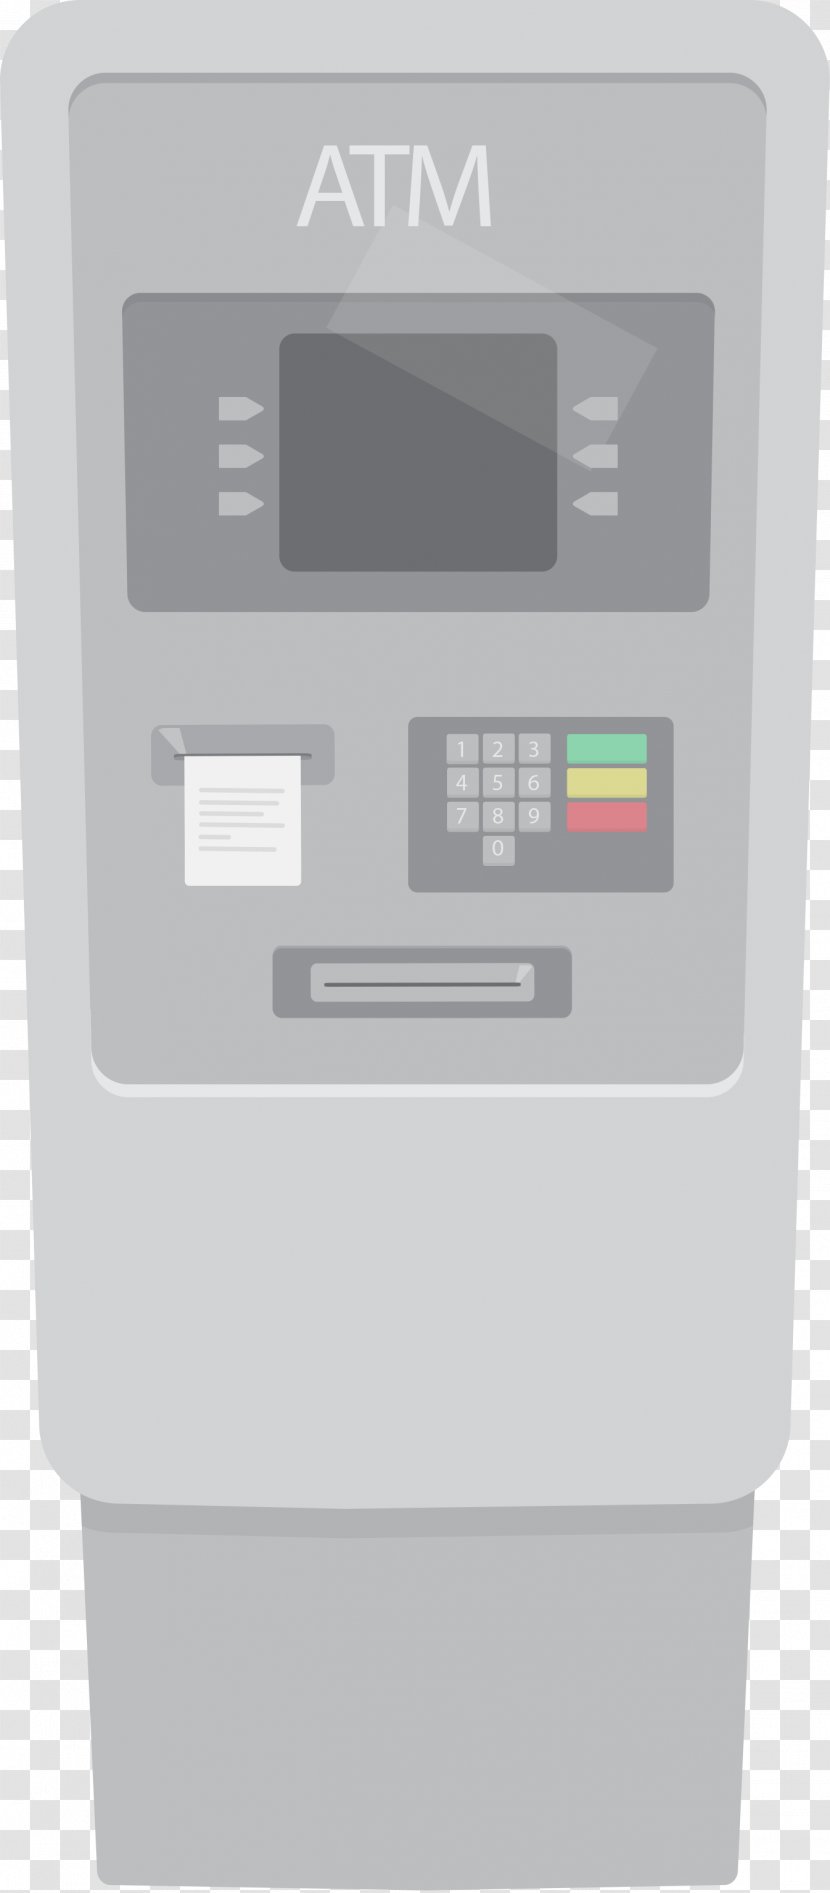 Automated Teller Machine Icon - ATM Transparent PNG